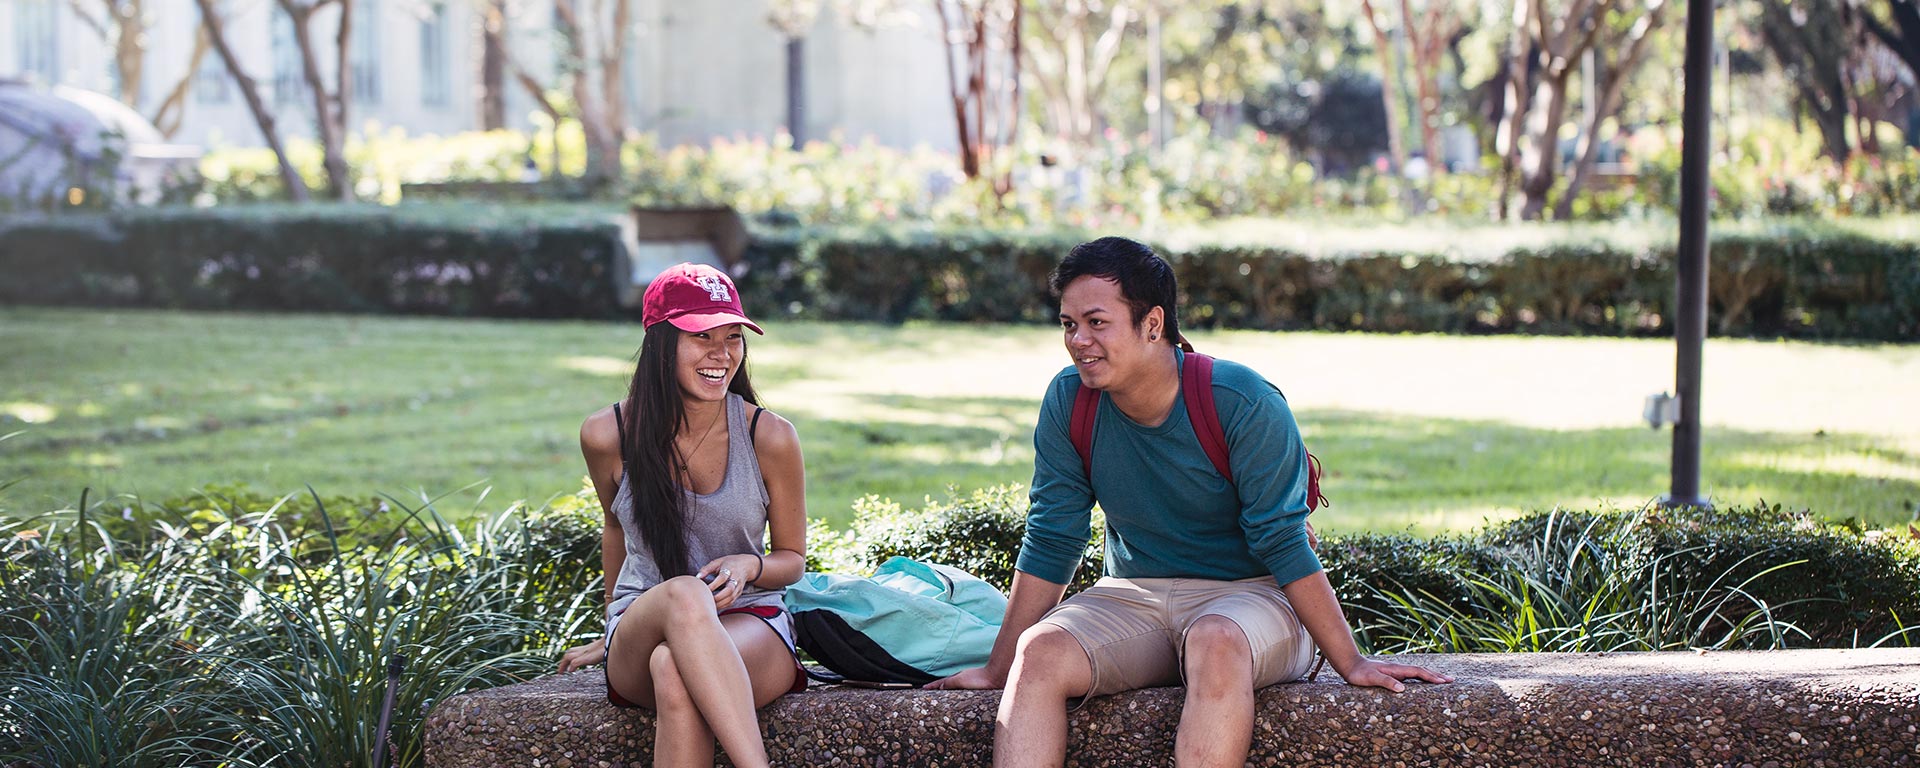 Two students sitting outside smiling